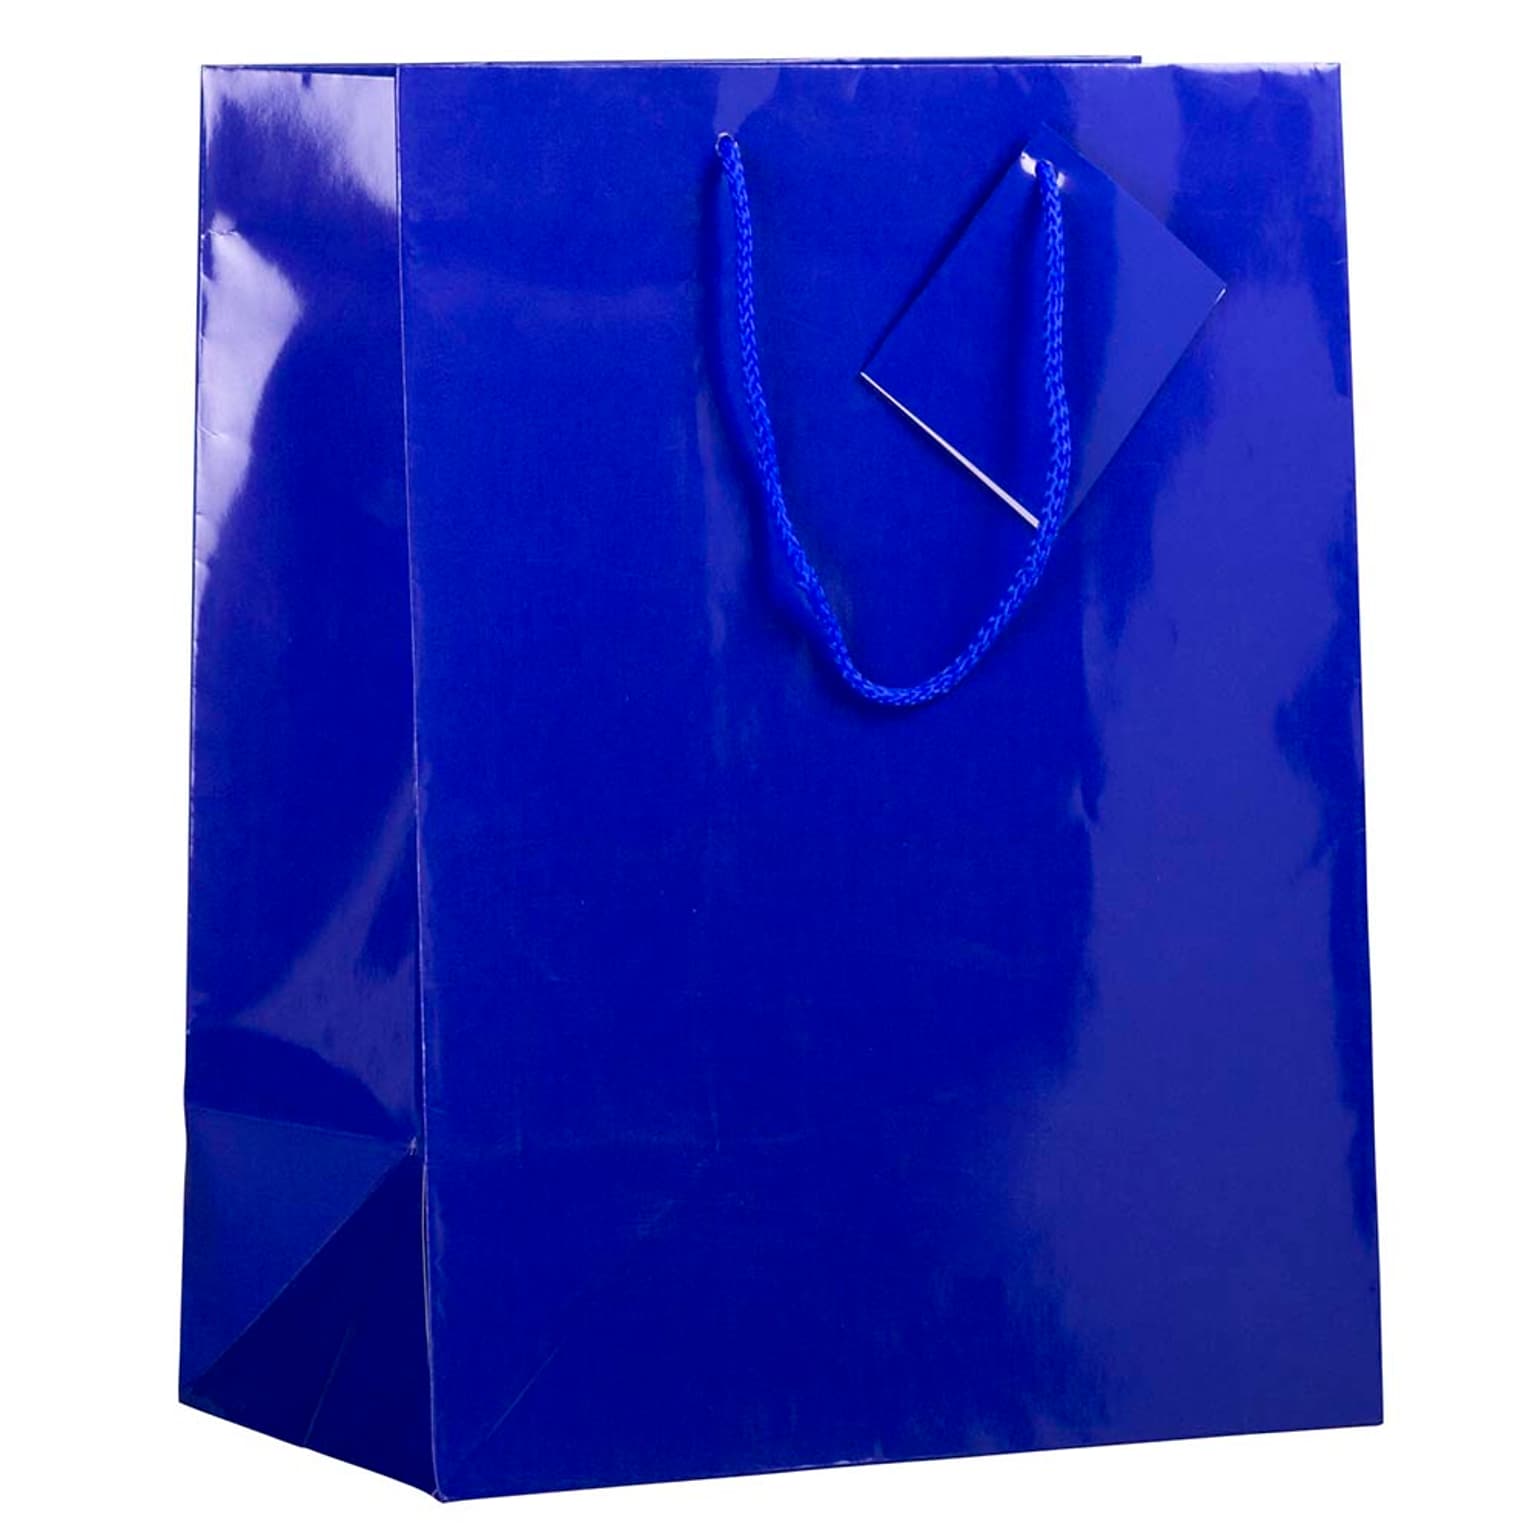 JAM PAPER Glossy Gift Bags with Rope Handles, Large, 10 x 13, Blue, 3 Bags/Pack (673GLBUB)